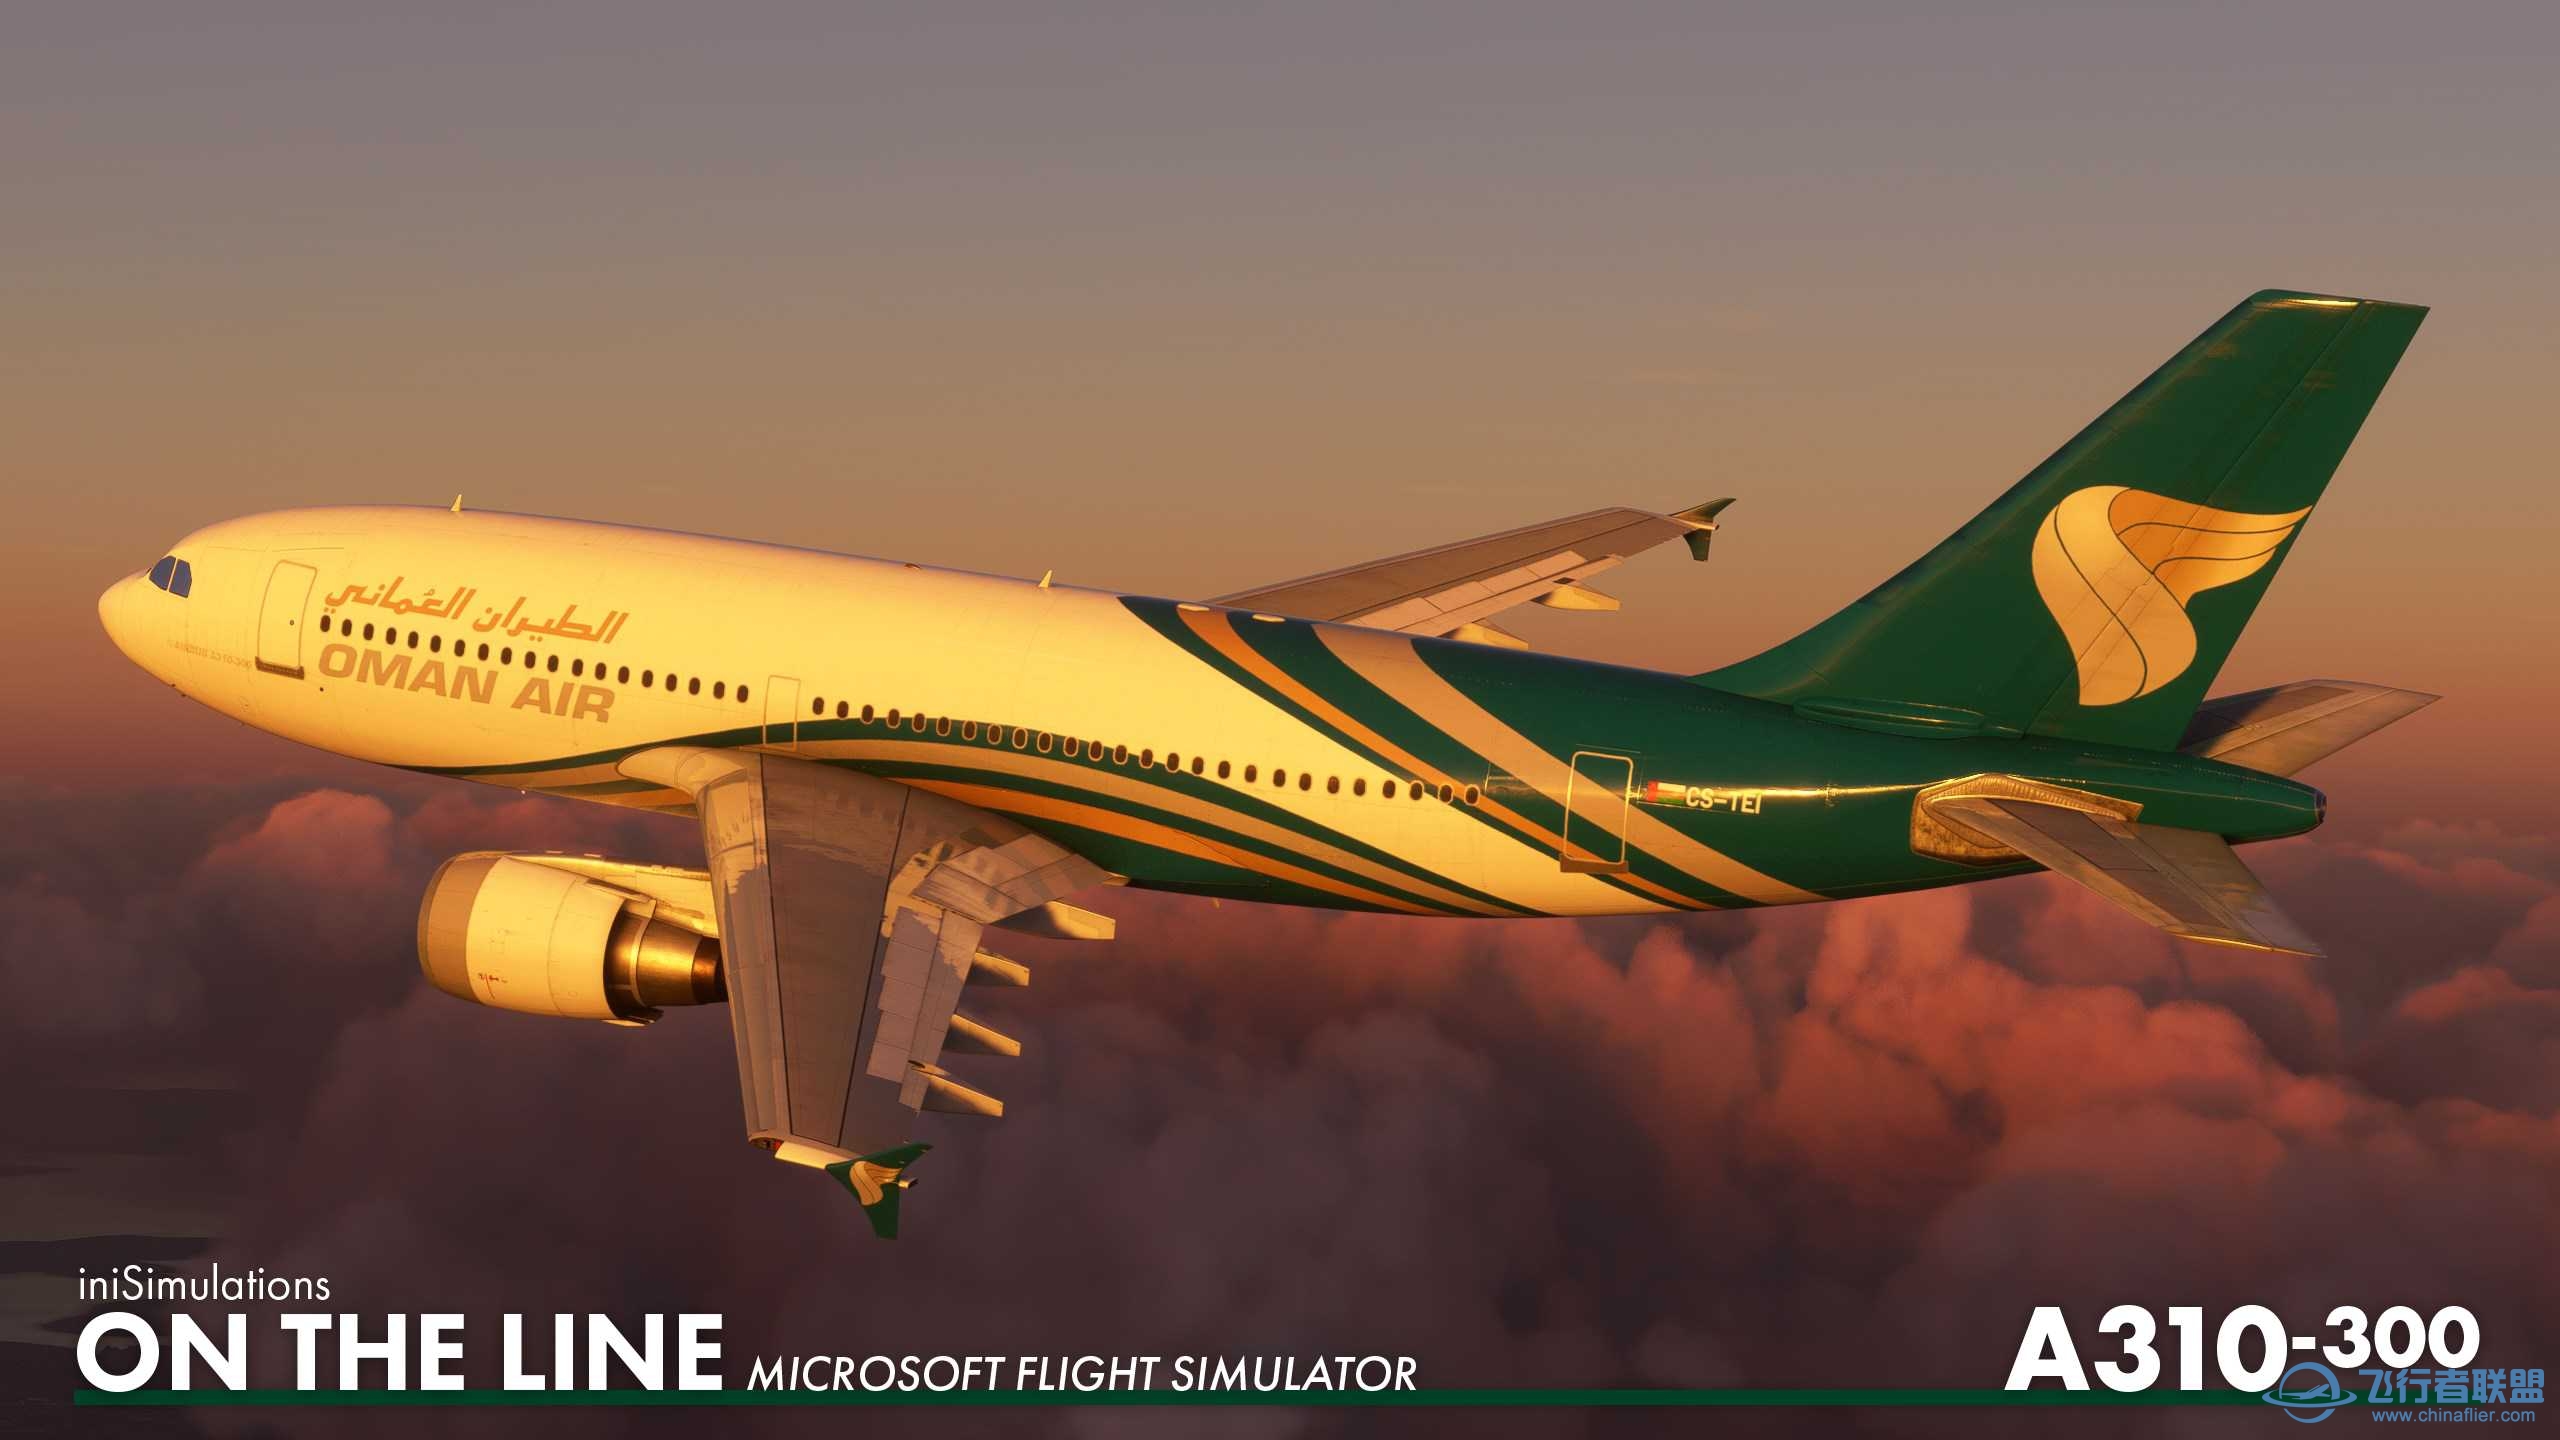 iniSimulations A310-300 will be coming to Microsoft Flight Simulator.-2546 